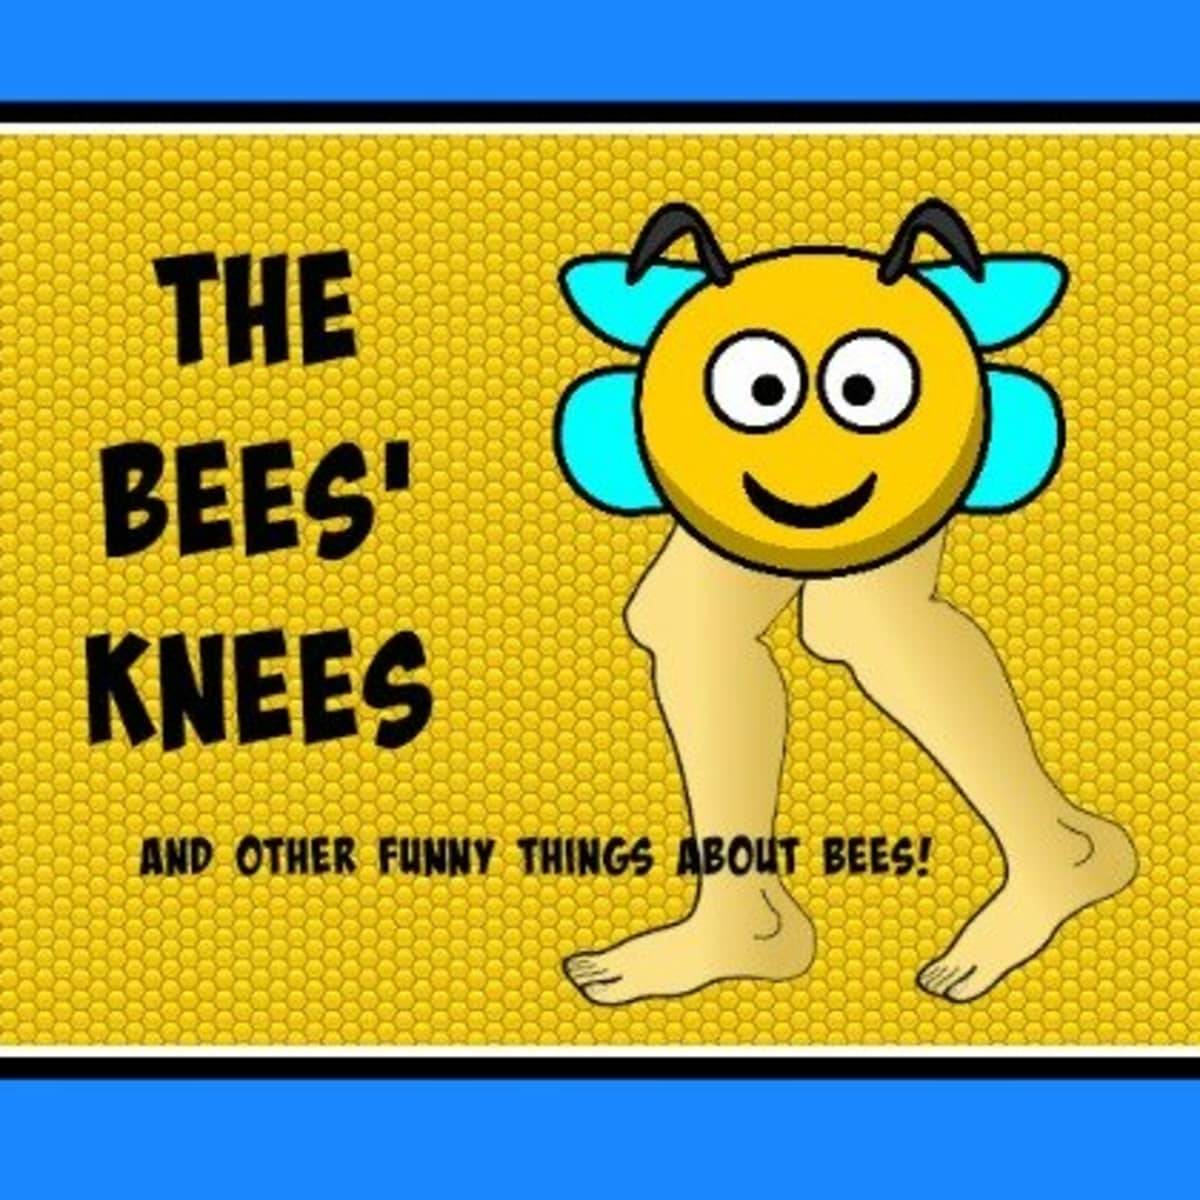 The Bees' Knees: Idioms, Jokes, and Other Funny Things About Bees -  LetterPile